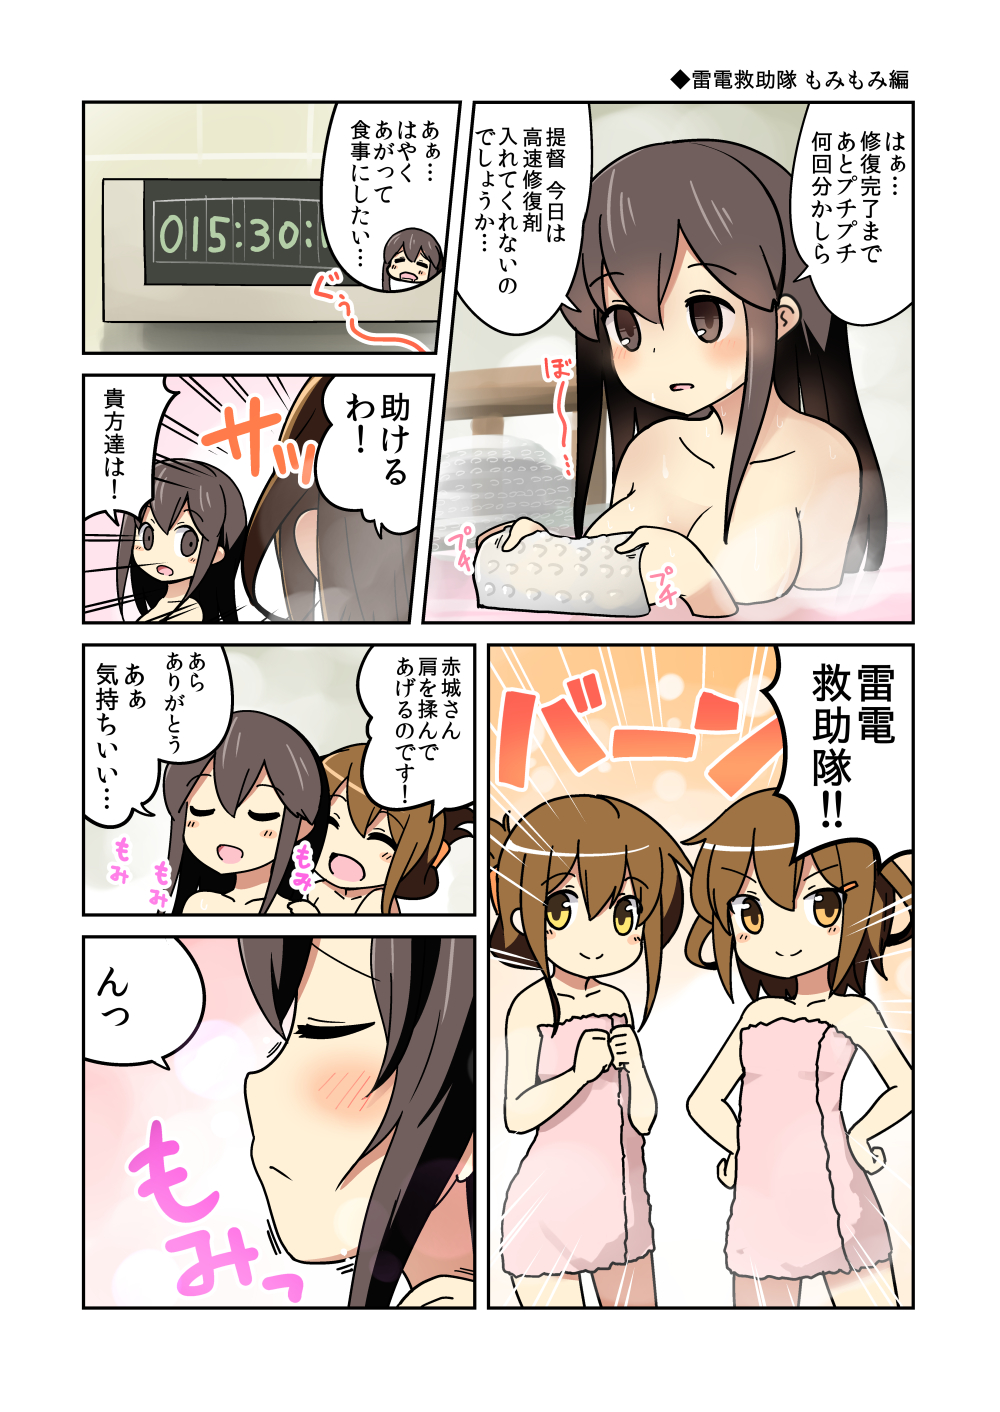 3girls akagi_(kantai_collection) bath bathing bell_(oppore_coppore) breasts brown_eyes brown_hair cleavage closed_eyes comic countdown_timer folded_ponytail hair_ornament hairclip highres ikazuchi_(kantai_collection) inazuma_(kantai_collection) kantai_collection light_brown_eyes long_hair massage multiple_girls naked_towel nude open_mouth short_hair smile towel translation_request yellow_eyes